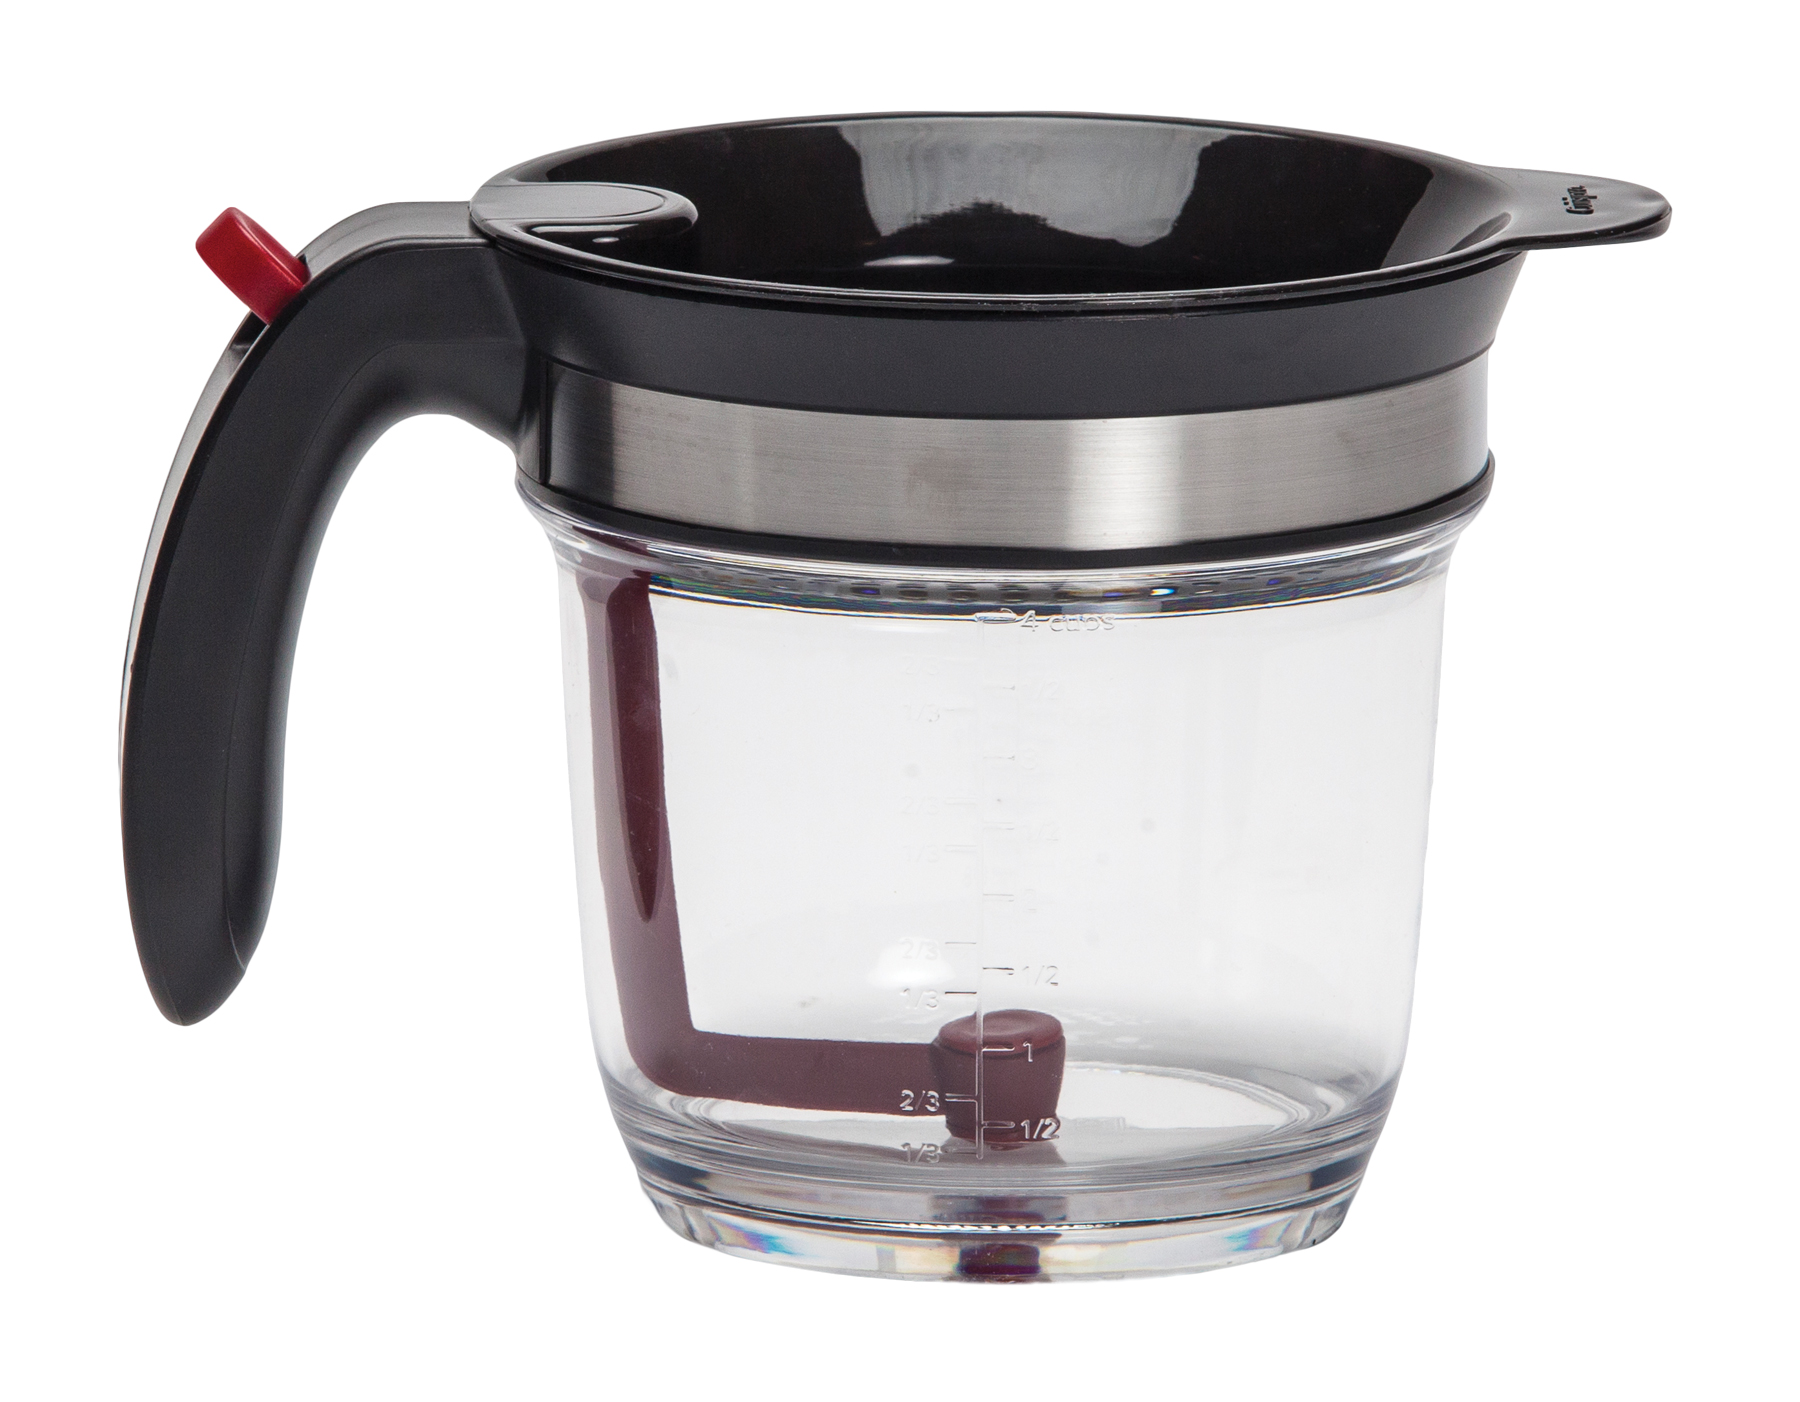 Cuisipro fat separator, $34.95, from The Pan Tree.